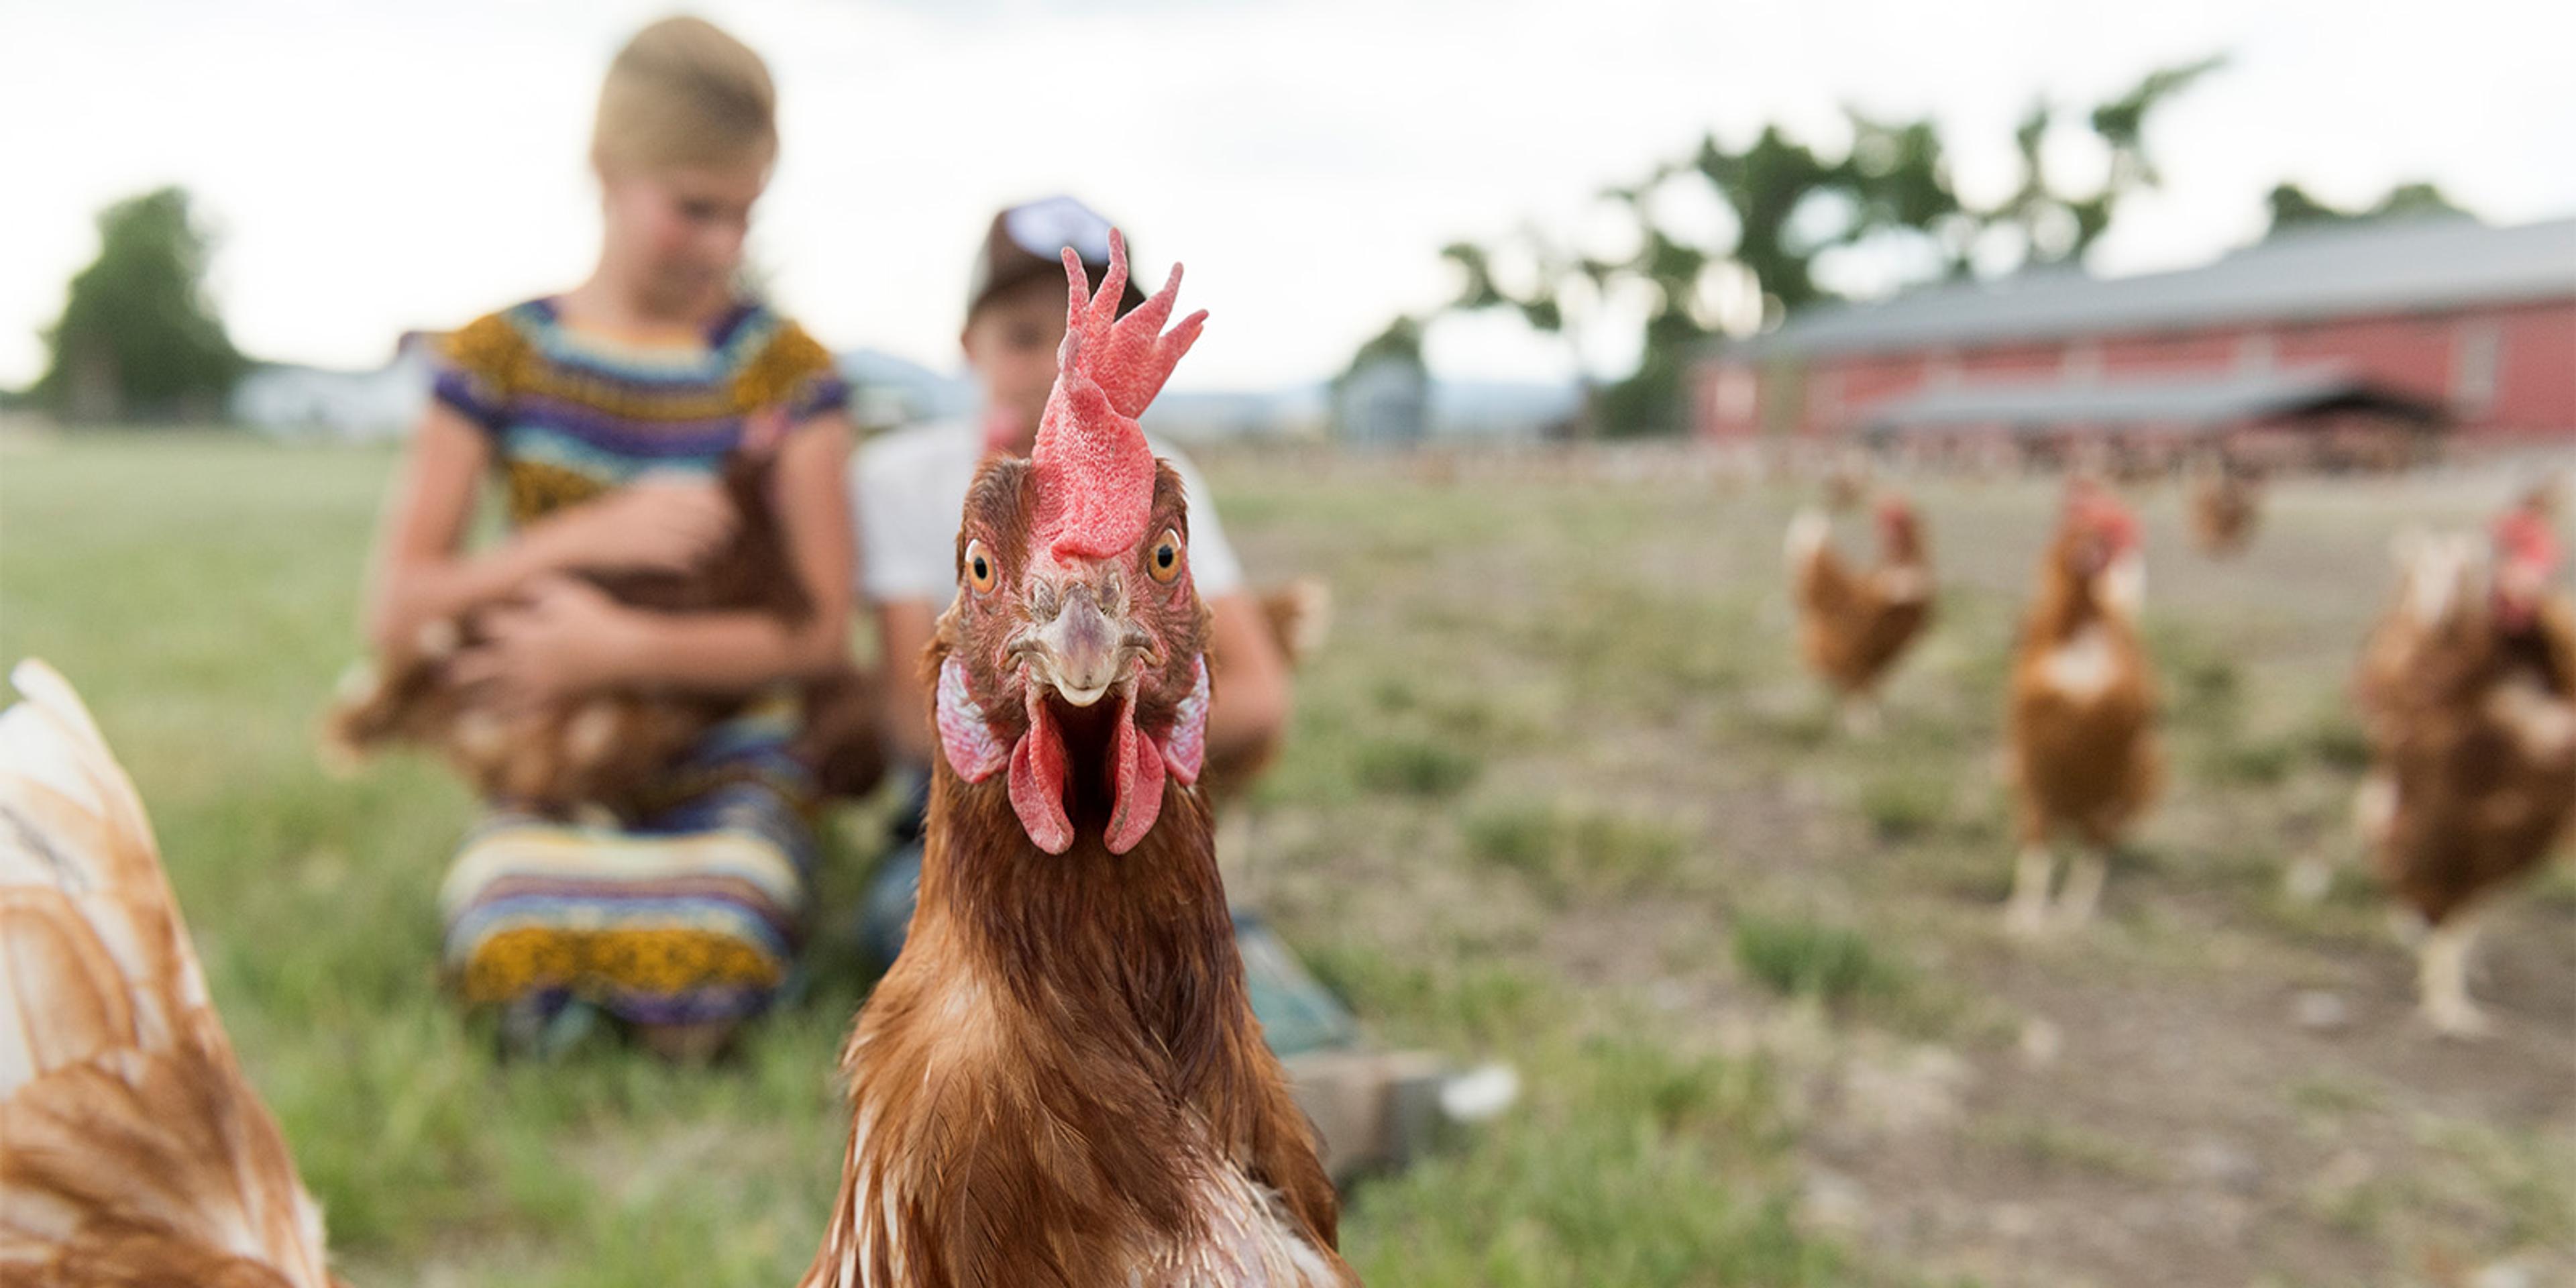 A hen stares at the camera as two children hold chickens at the Toews farm in Colorado.